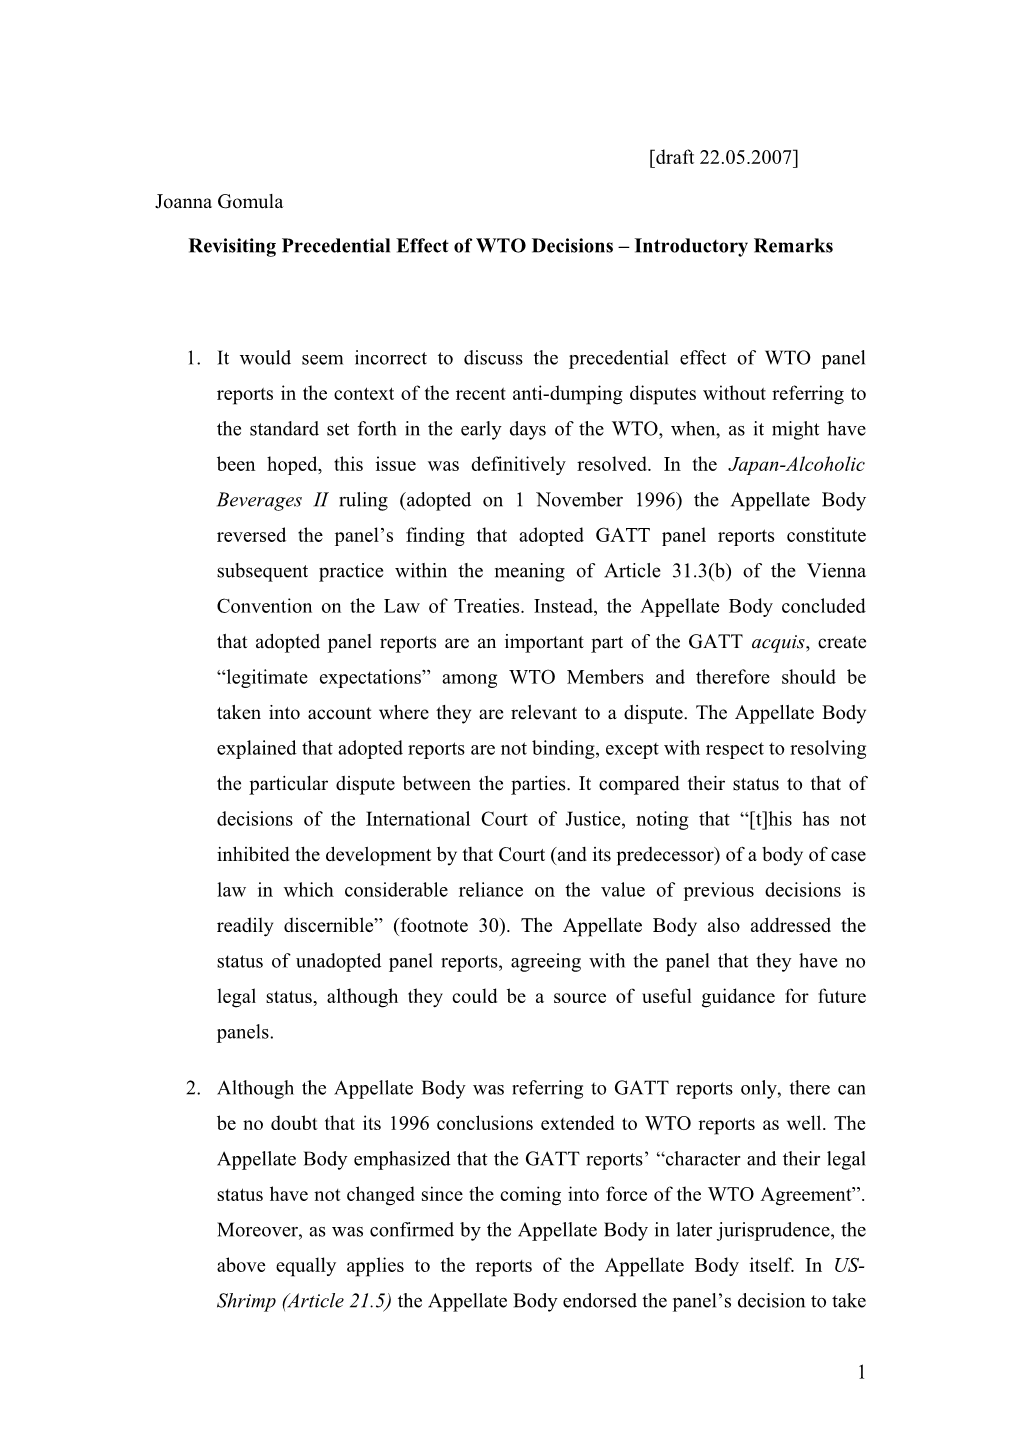 Revisiting Precedential Effect of WTO Decisions Introductory Remarks